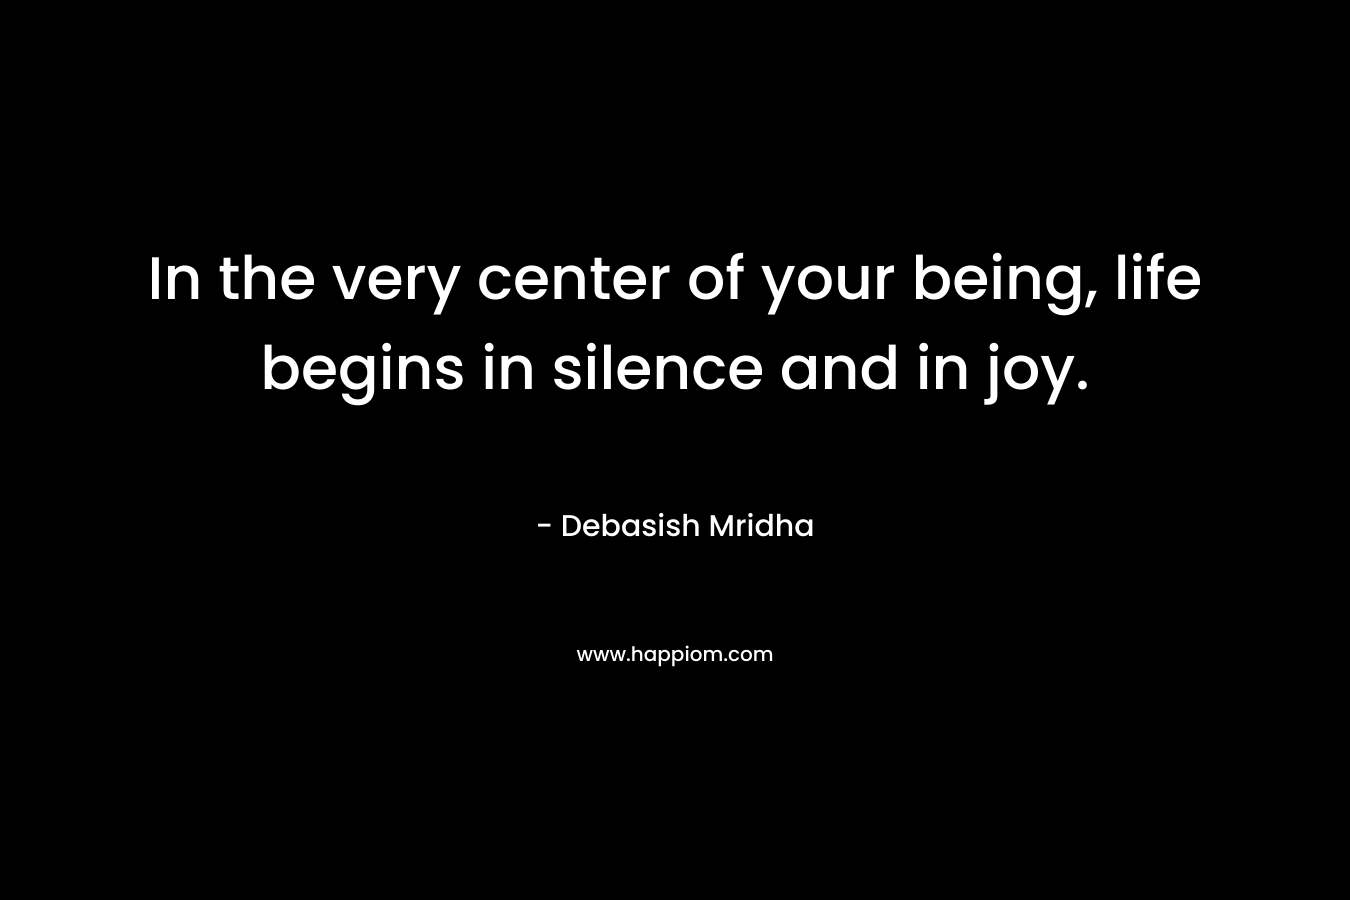 In the very center of your being, life begins in silence and in joy.